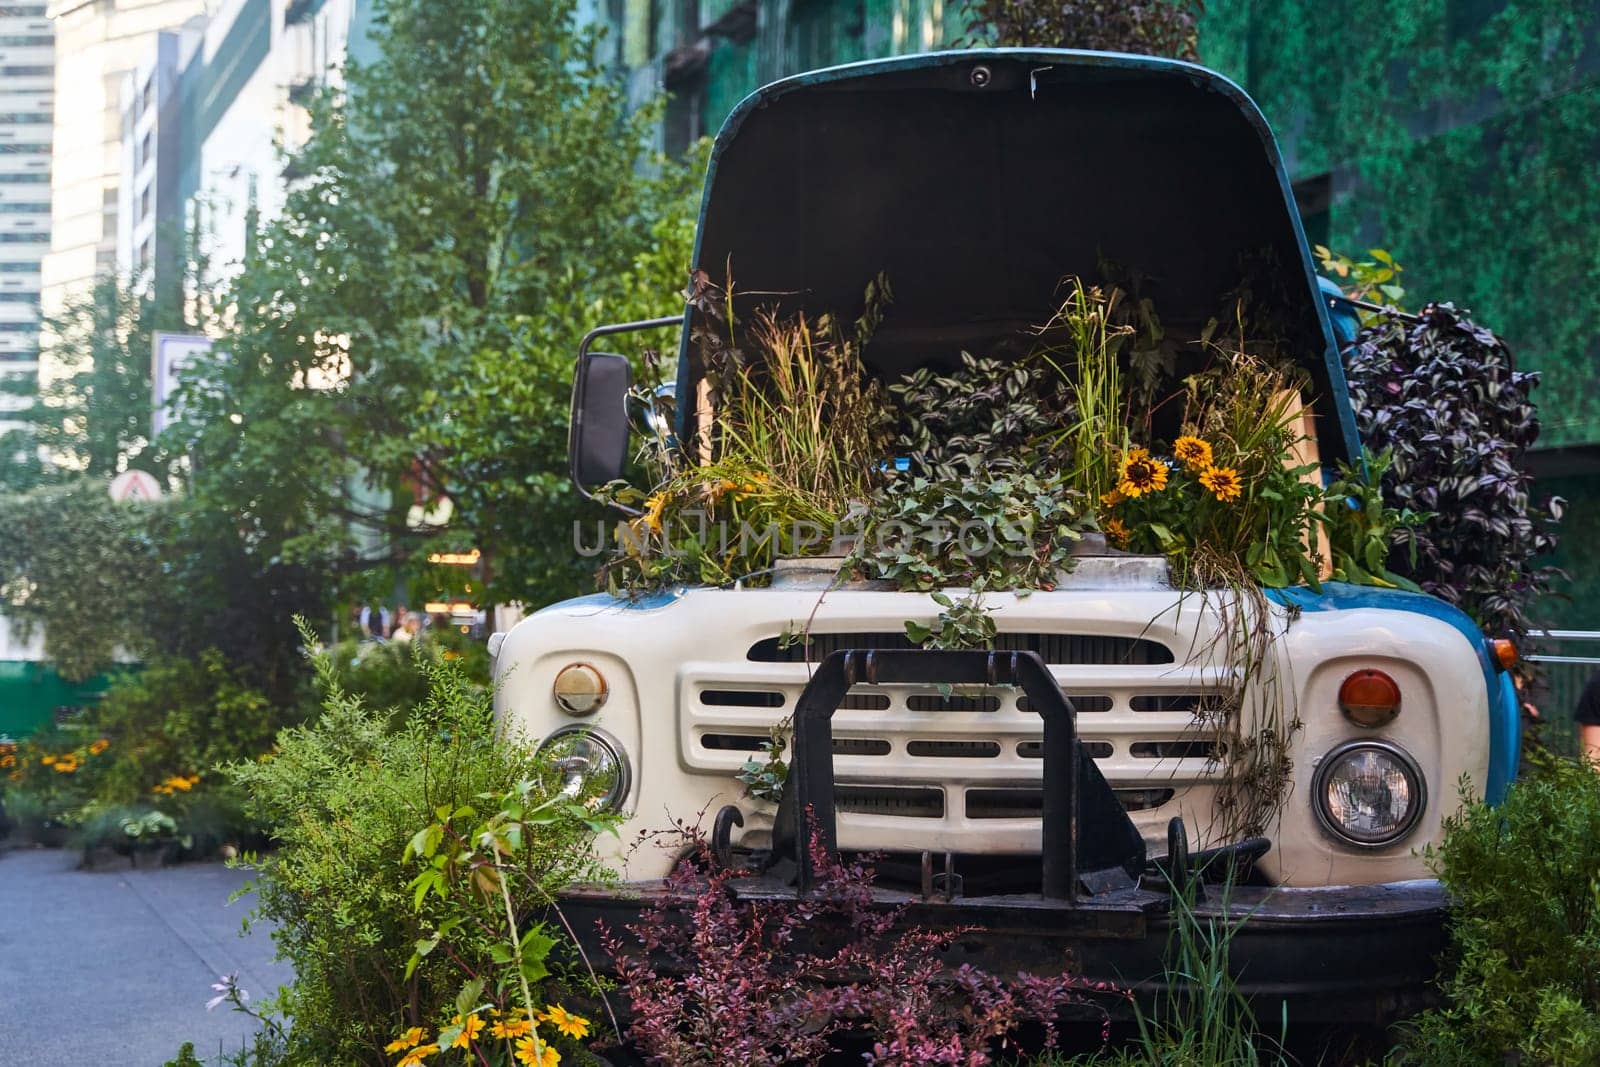 Moscow, Russia - 30.07.2022: An old blue truck filled with a variety of plants and blooms. Flower bed in Moscow, Russia. by driver-s